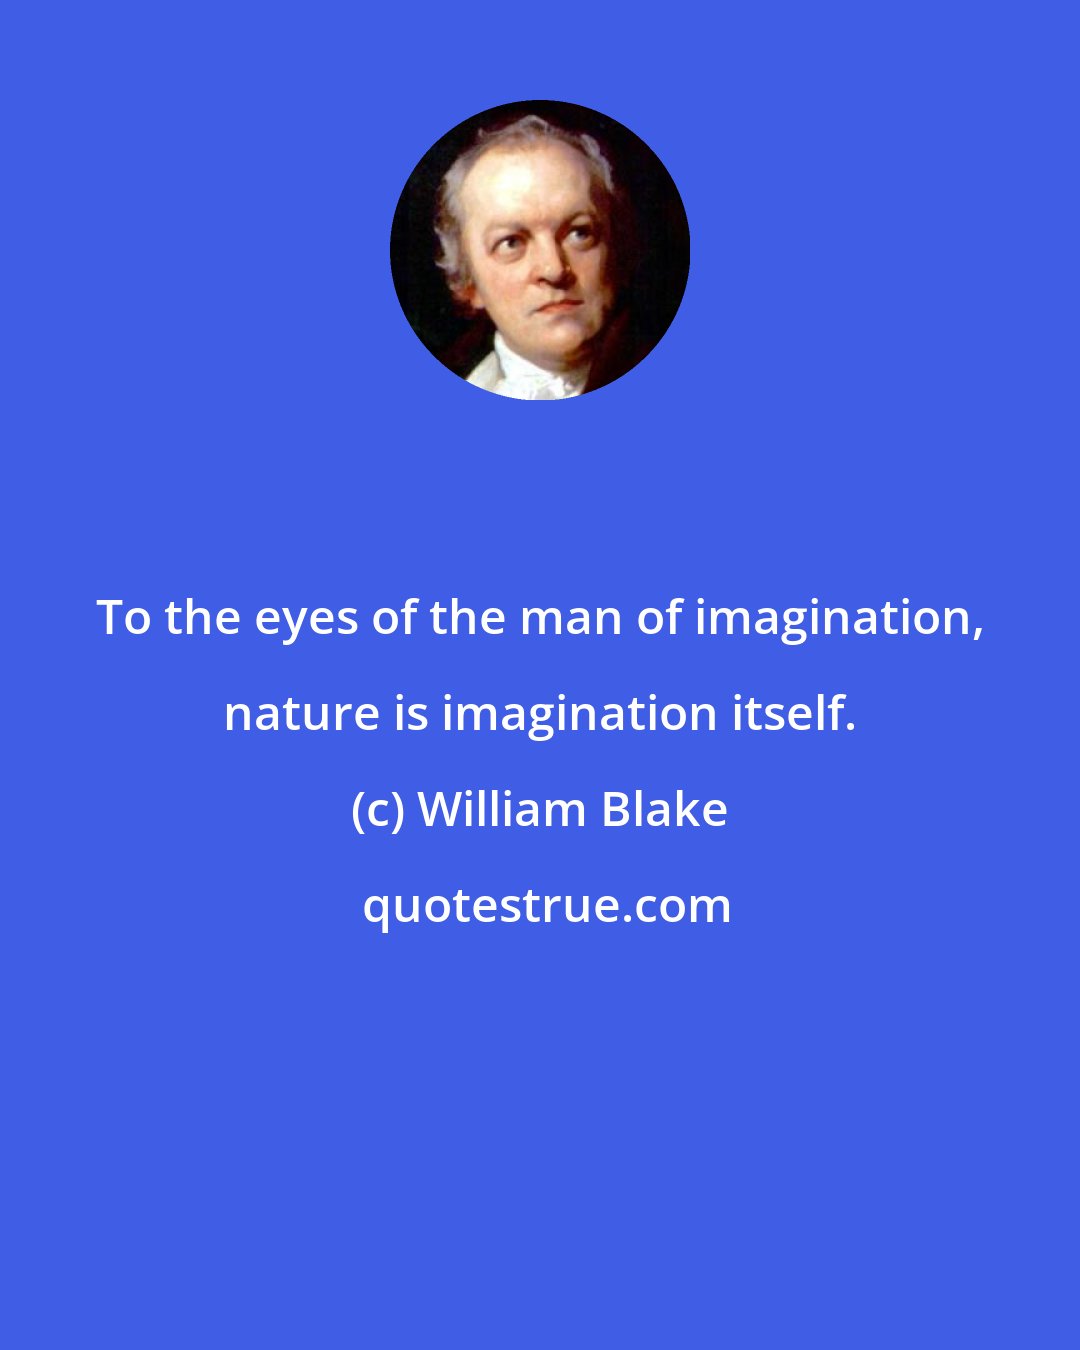 William Blake: To the eyes of the man of imagination, nature is imagination itself.